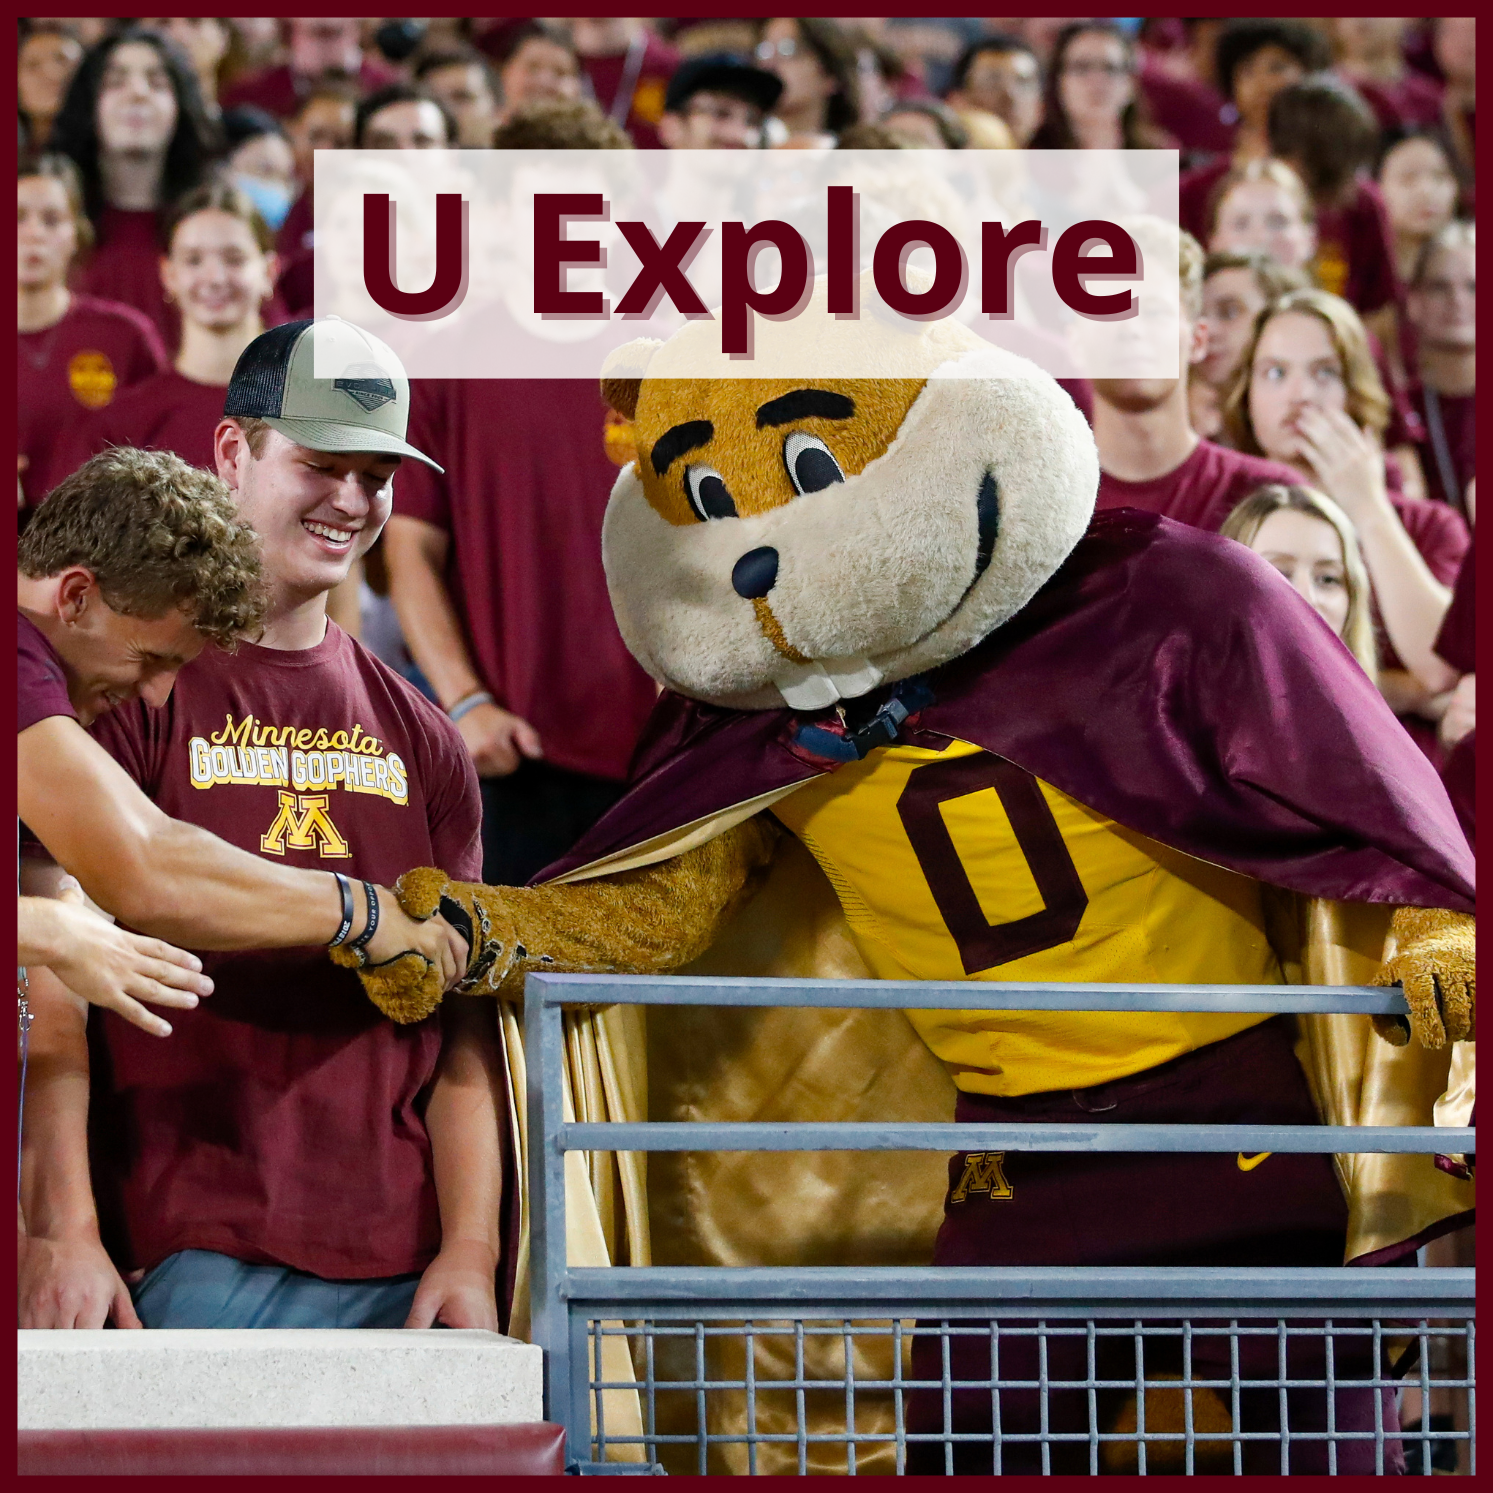 U Explore, with a photo of Goldy shaking students' hands